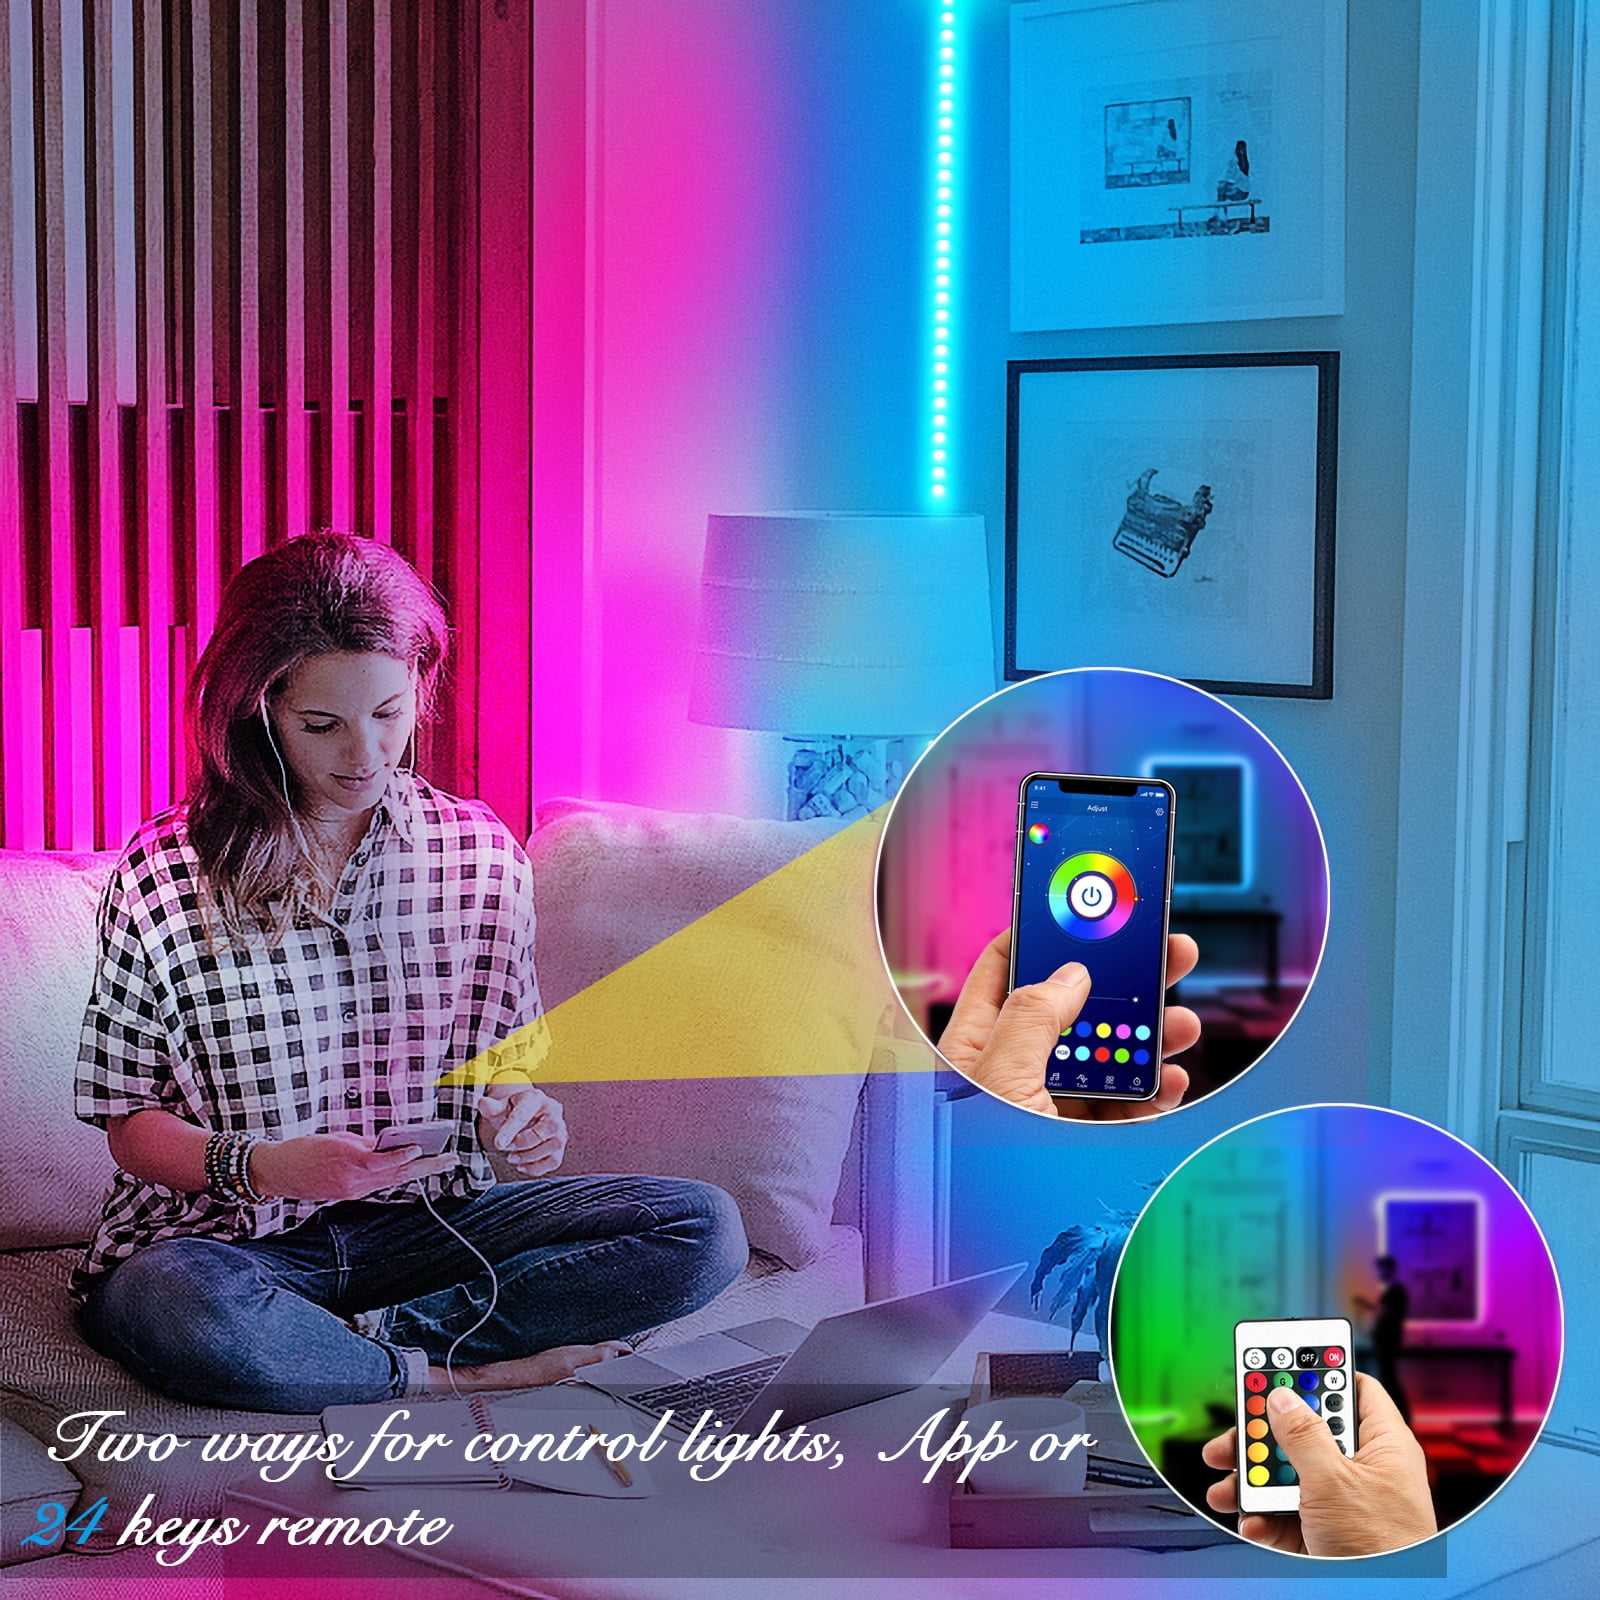 100FT/30M LED Strip Light, Smart RGB 5050 SMD Led Light Strip Music Sync  600LEDs Color Changing Light Strips Bluetooth APP Control with 44-Key  Remote